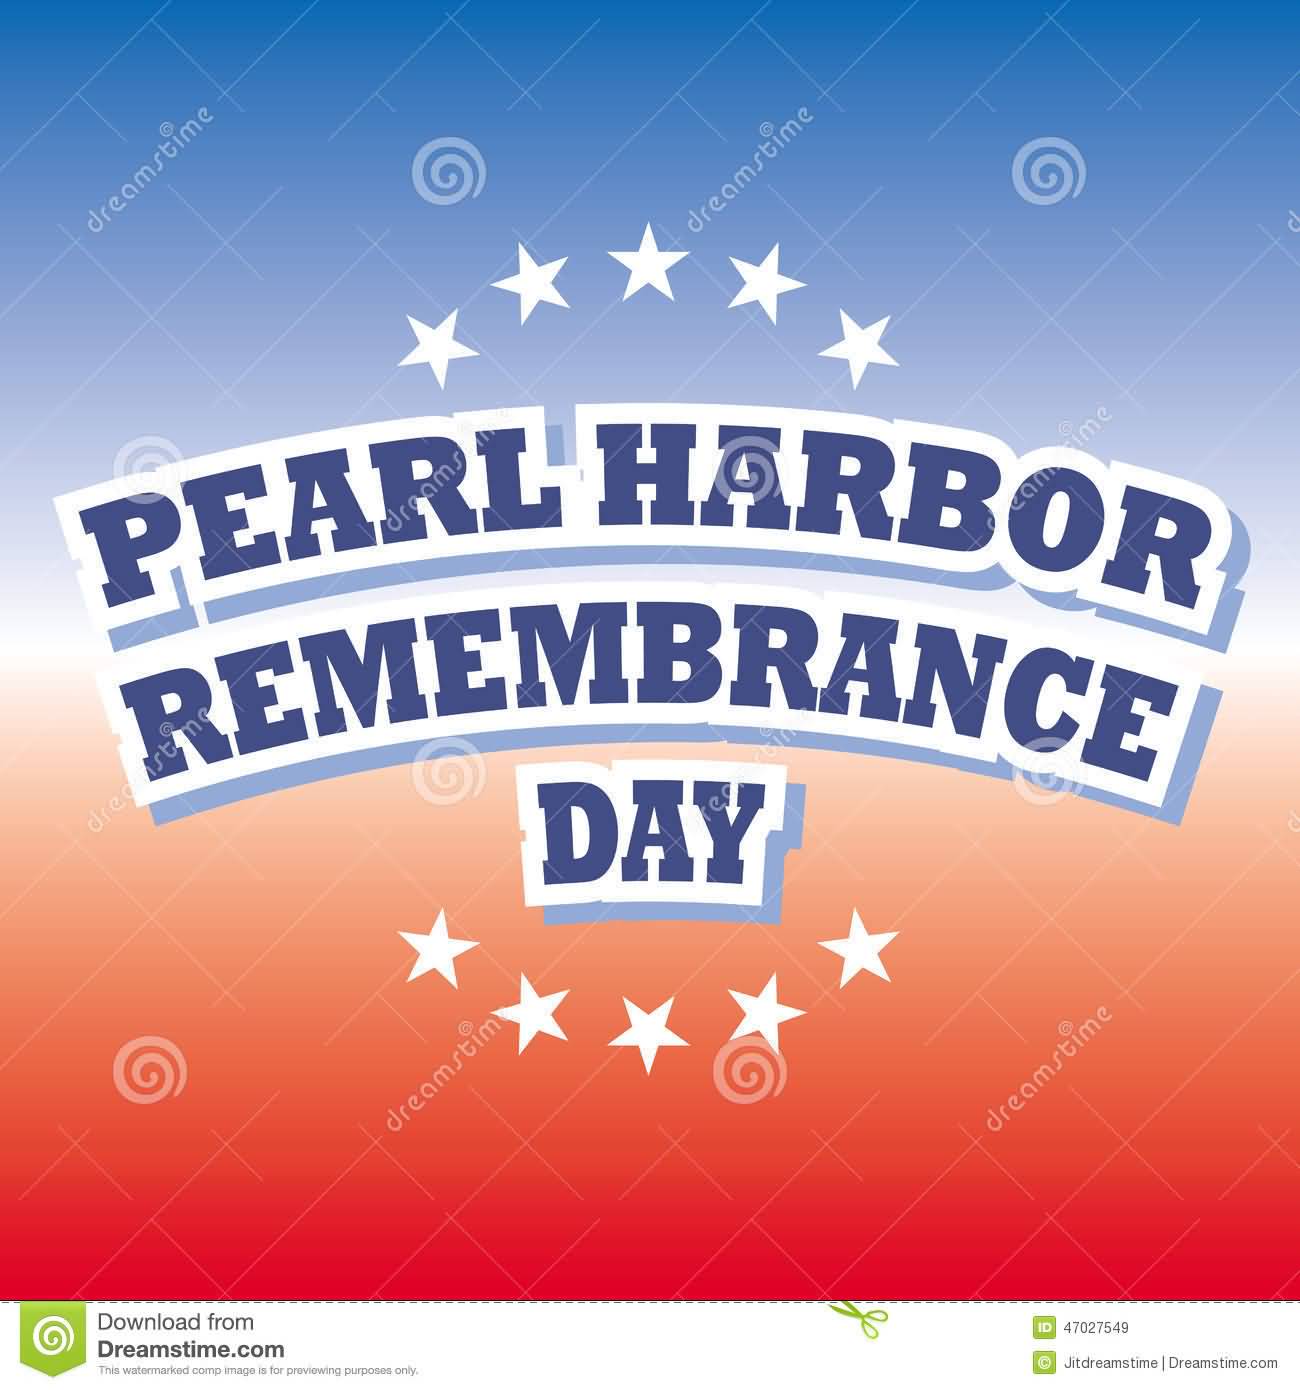 Pearl Harbor Remembrance Day Image